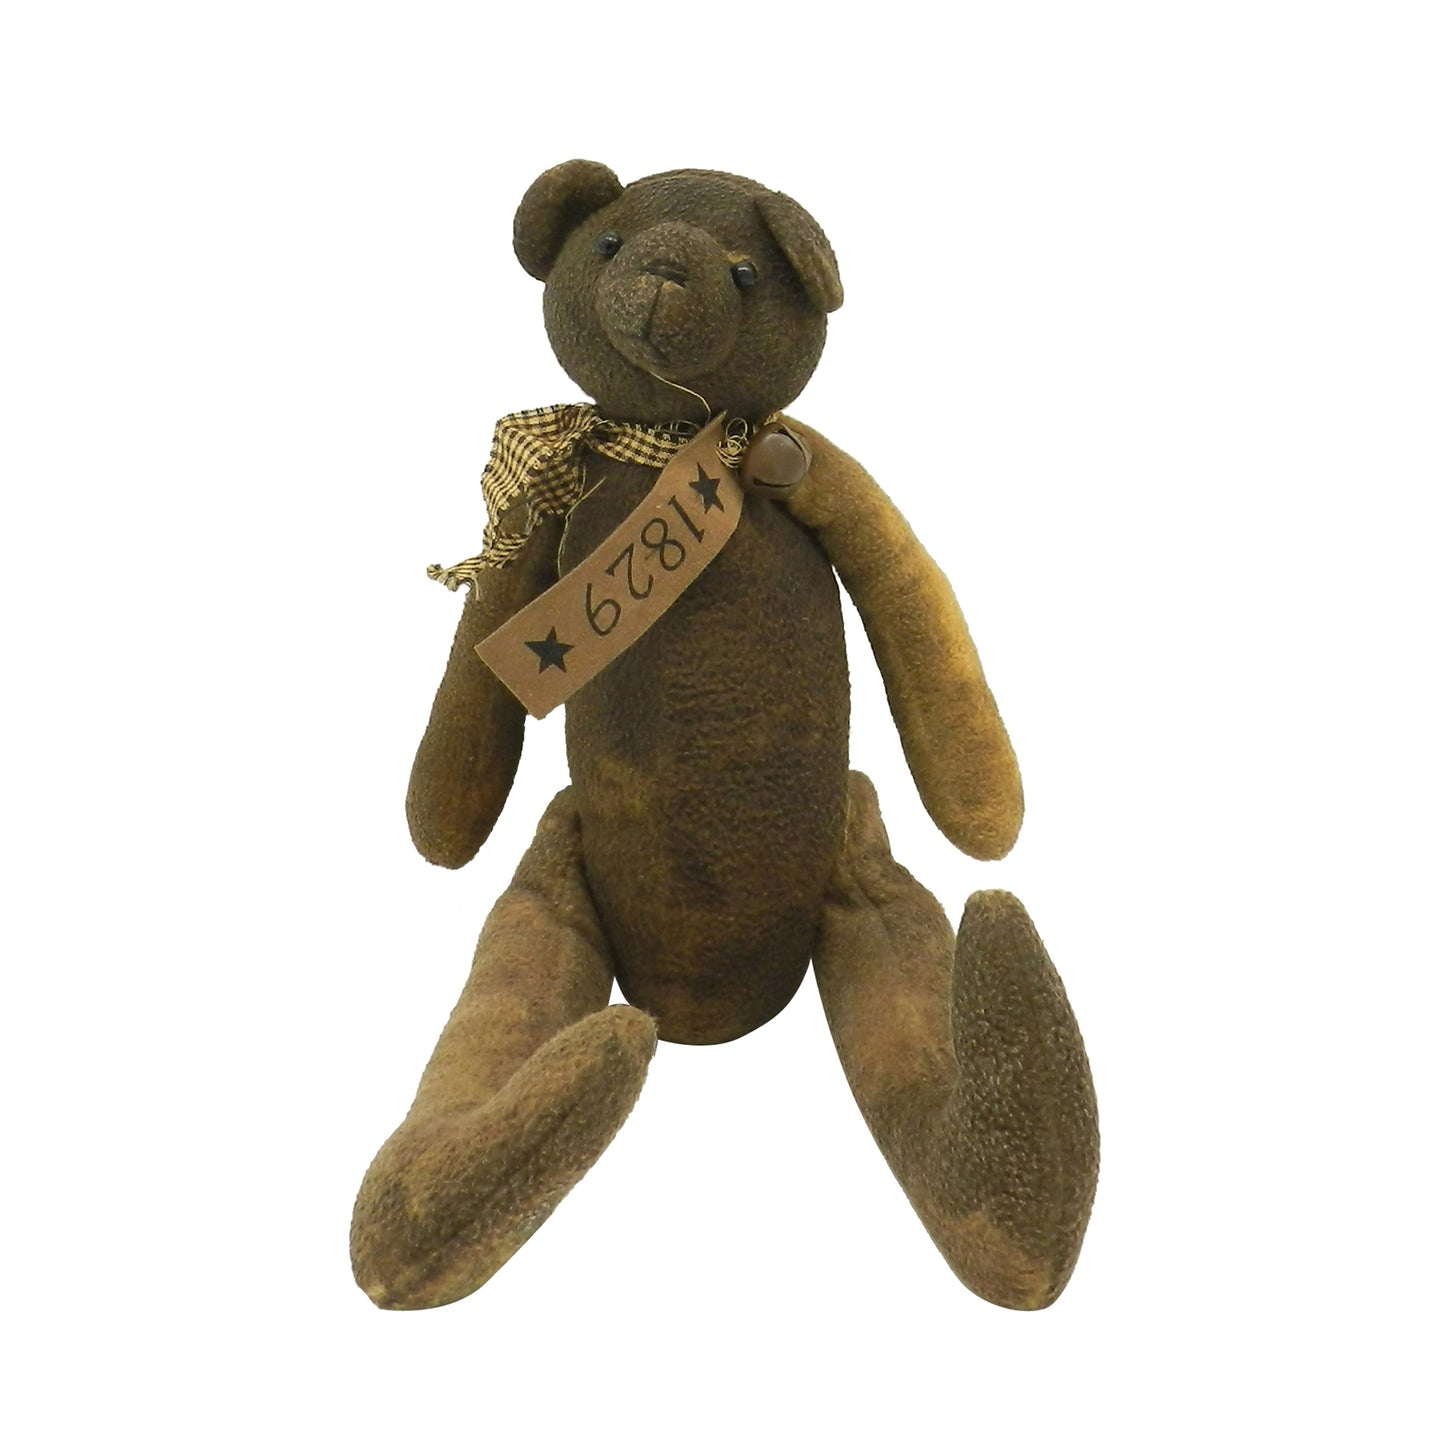 CVHOMEDECO. Antique Grungy Stuffed Bear Decoration with Rusty Bell Collar. 17 X 11 Inch